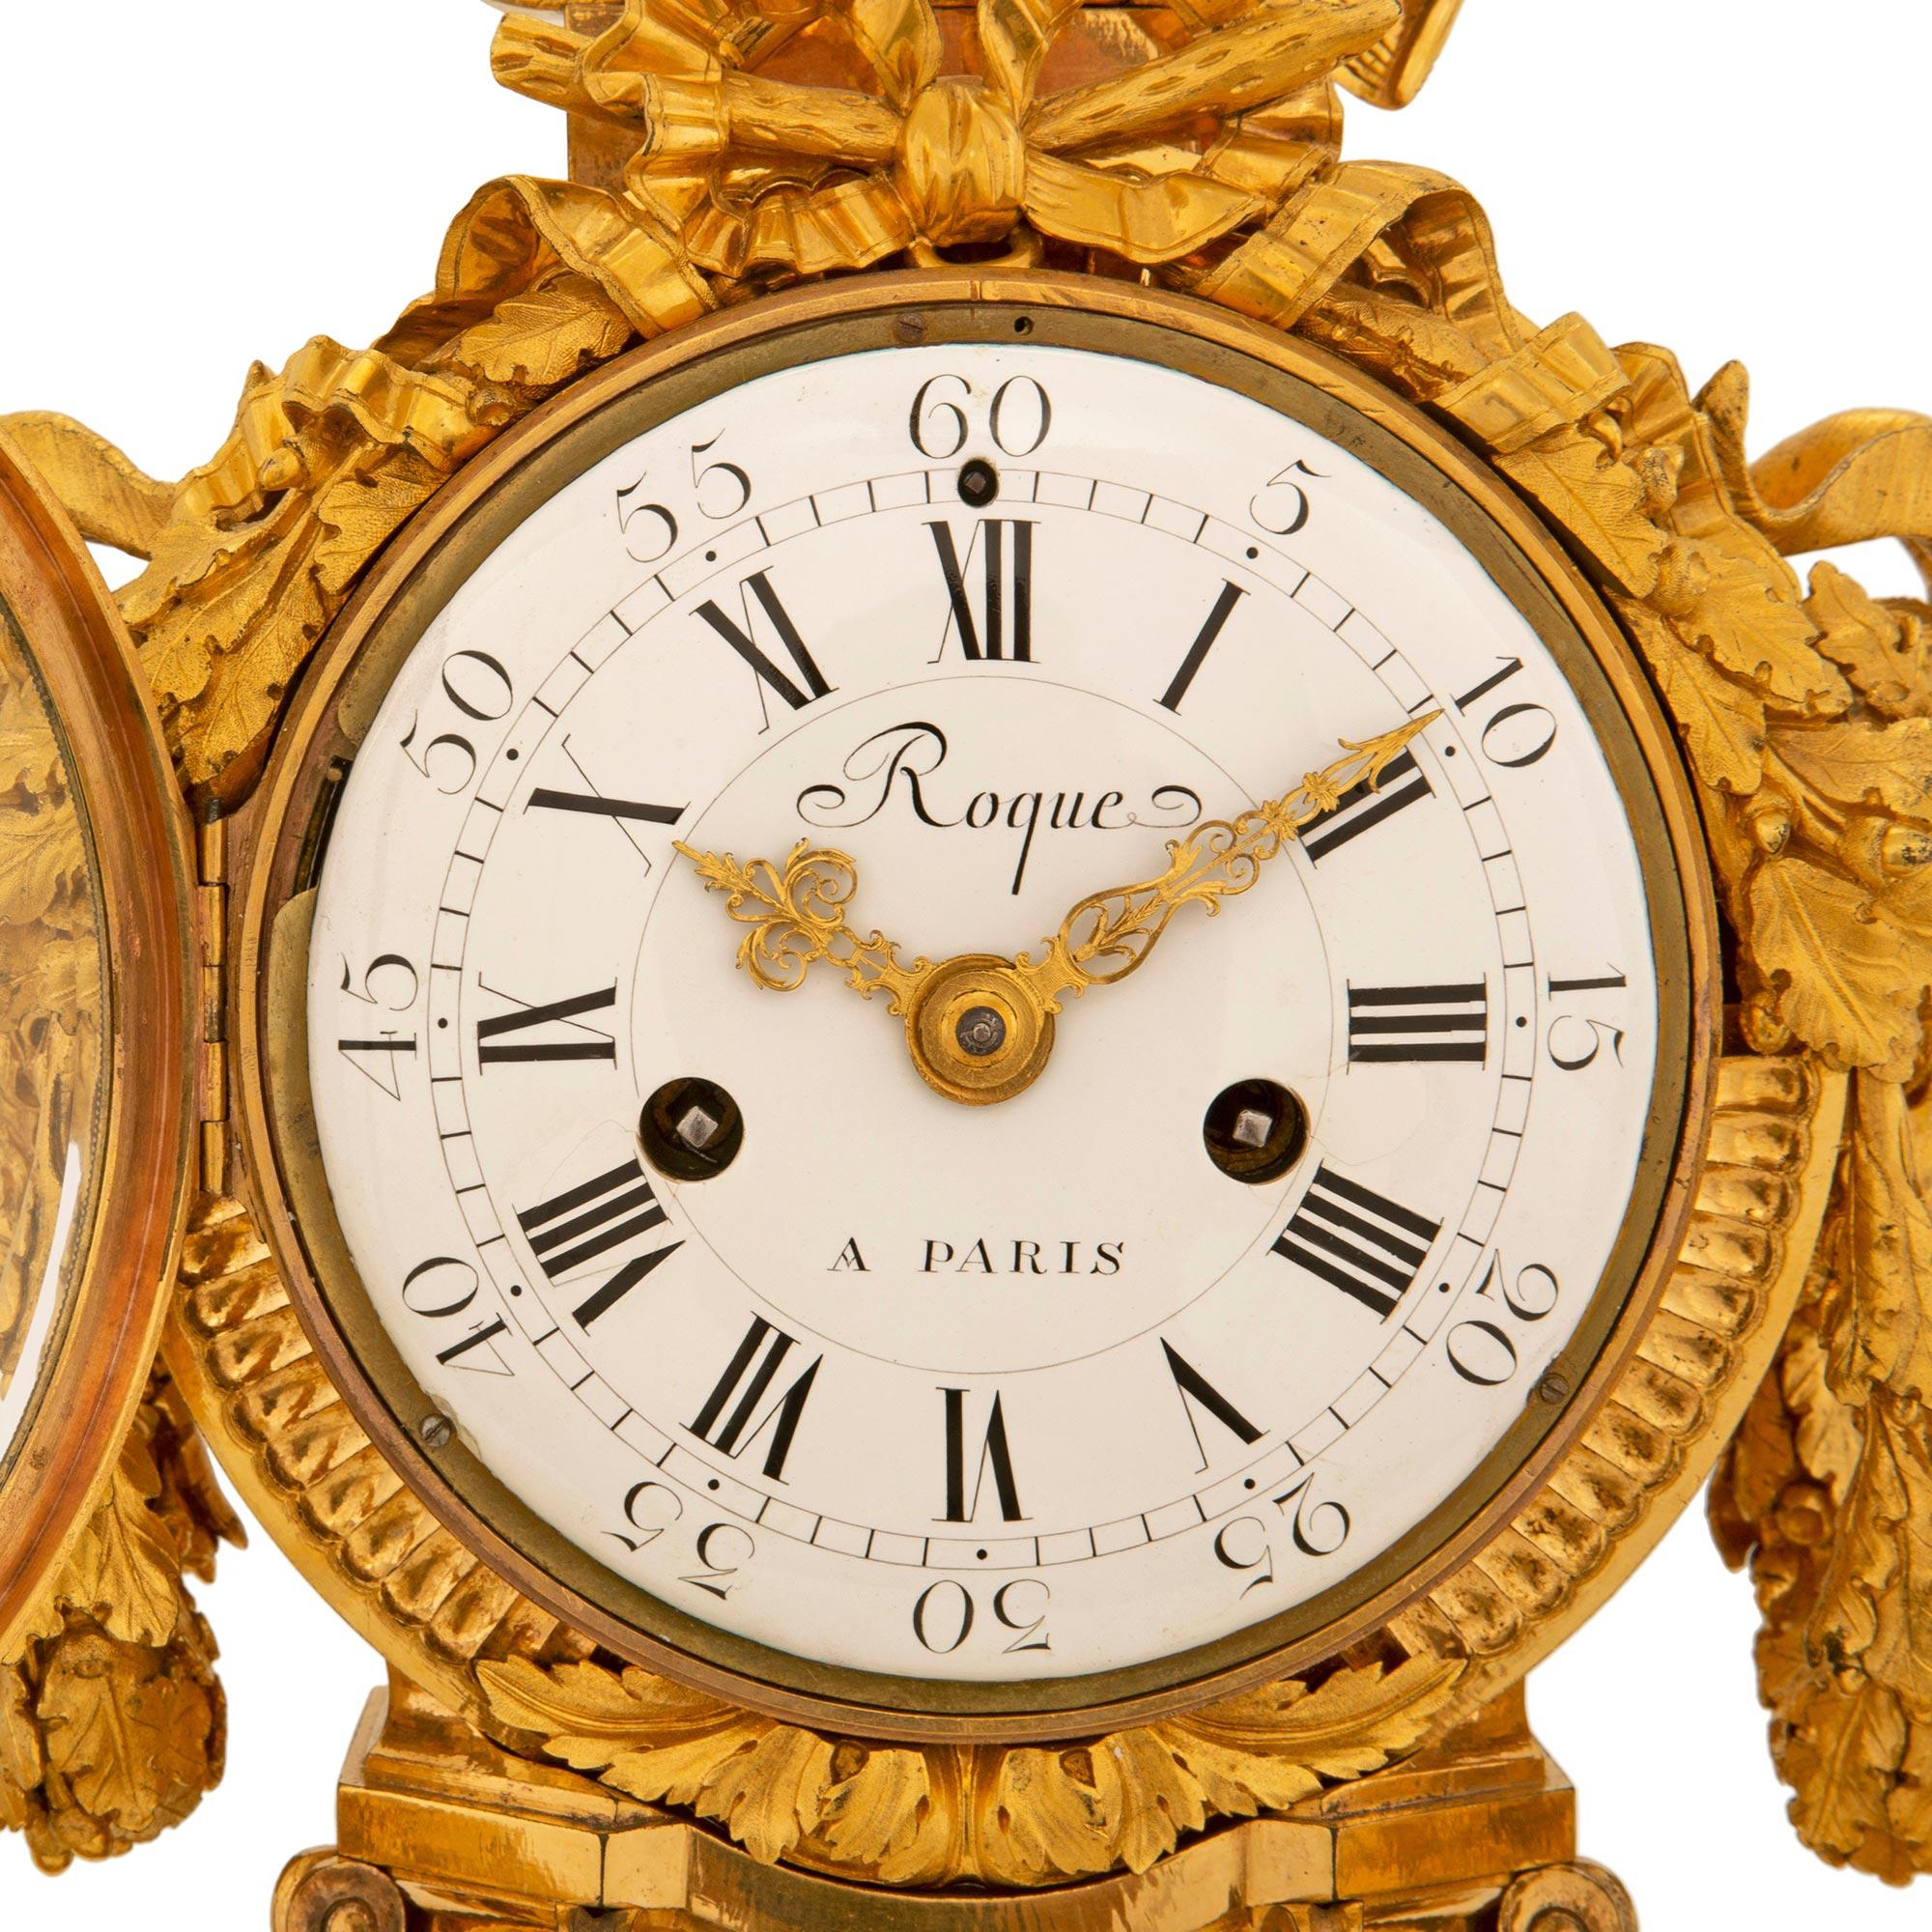 A stunning and most impressive French 19th century Louis XVI st. ormolu clock by Roque, Paris. The clock is raised by elegant circular mottled feet with fine wrap around foliate bands. Above each foot at the white Carrara marble base are striking